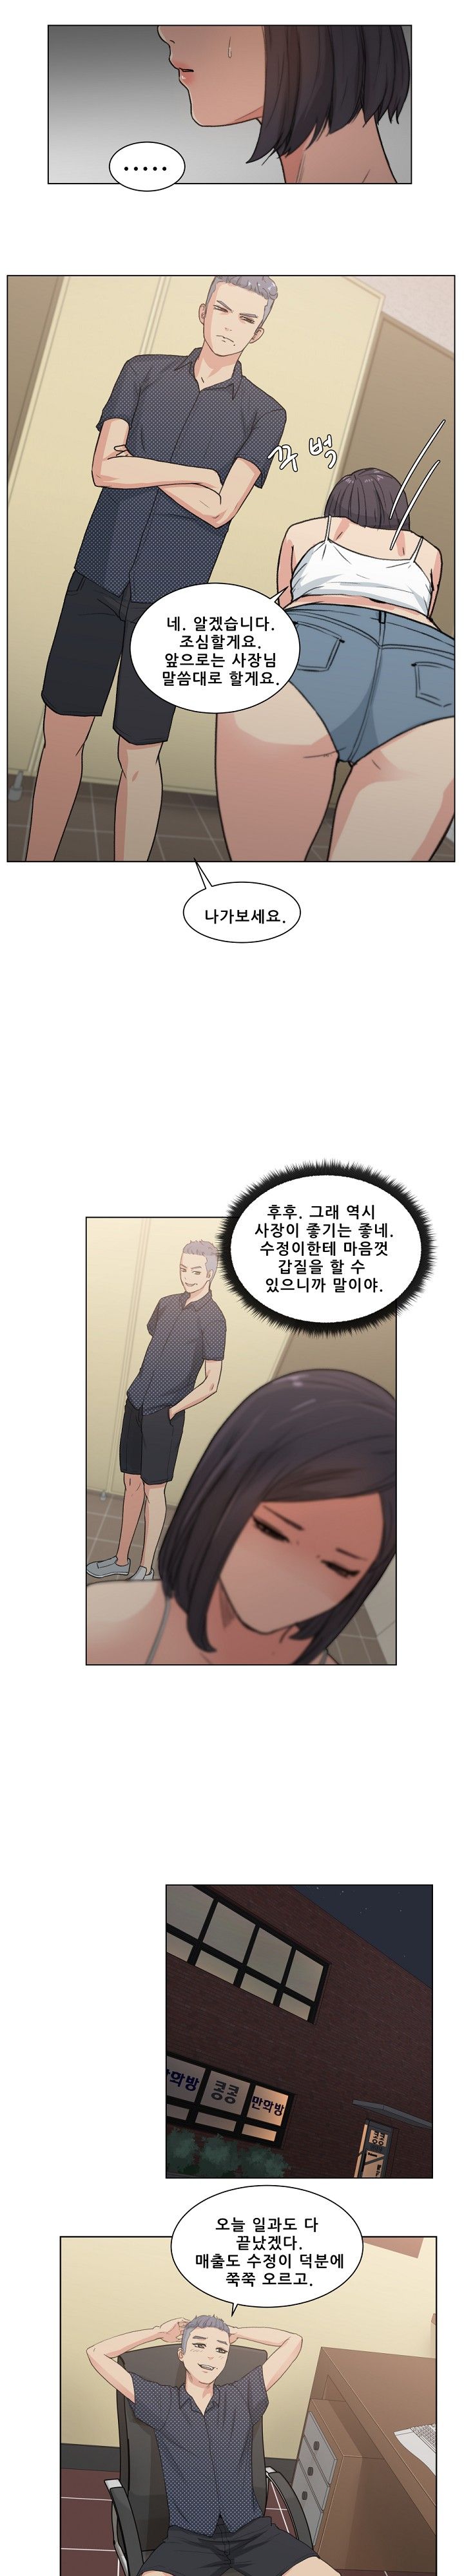 Sooyung Comic Shop Raw - Chapter 2 Page 12